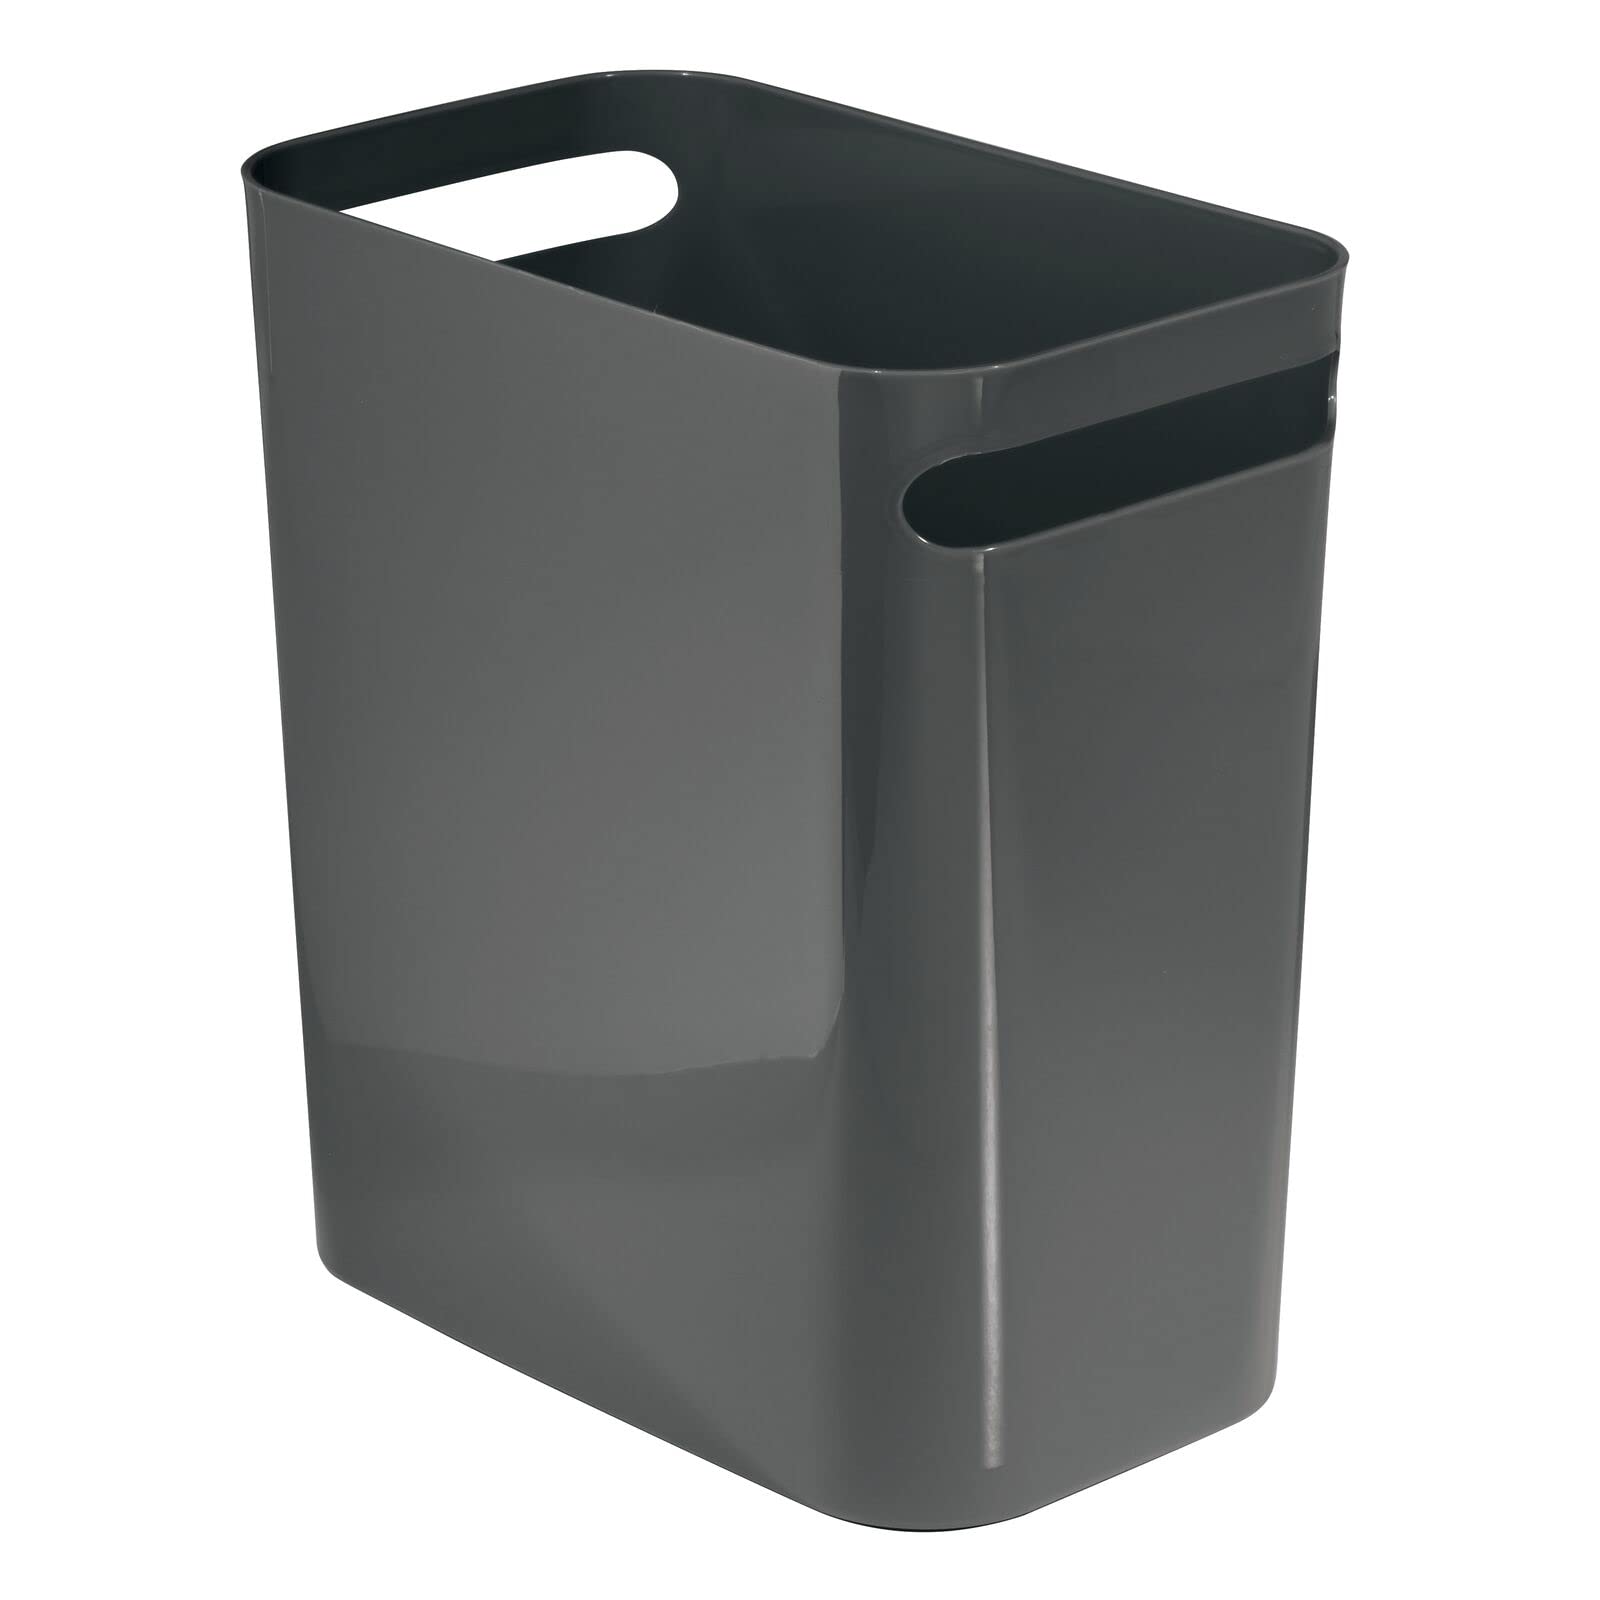 mDesign Plastic Slim Large 2.5 Gallon Trash Can Wastebasket, Classic Bathroom, Bedroom, Kitchen, Office Garbage Container Recycle Bin, Outdoor Waste, Recycling - Aura Collection, 2 Pack, Charcoal Gray